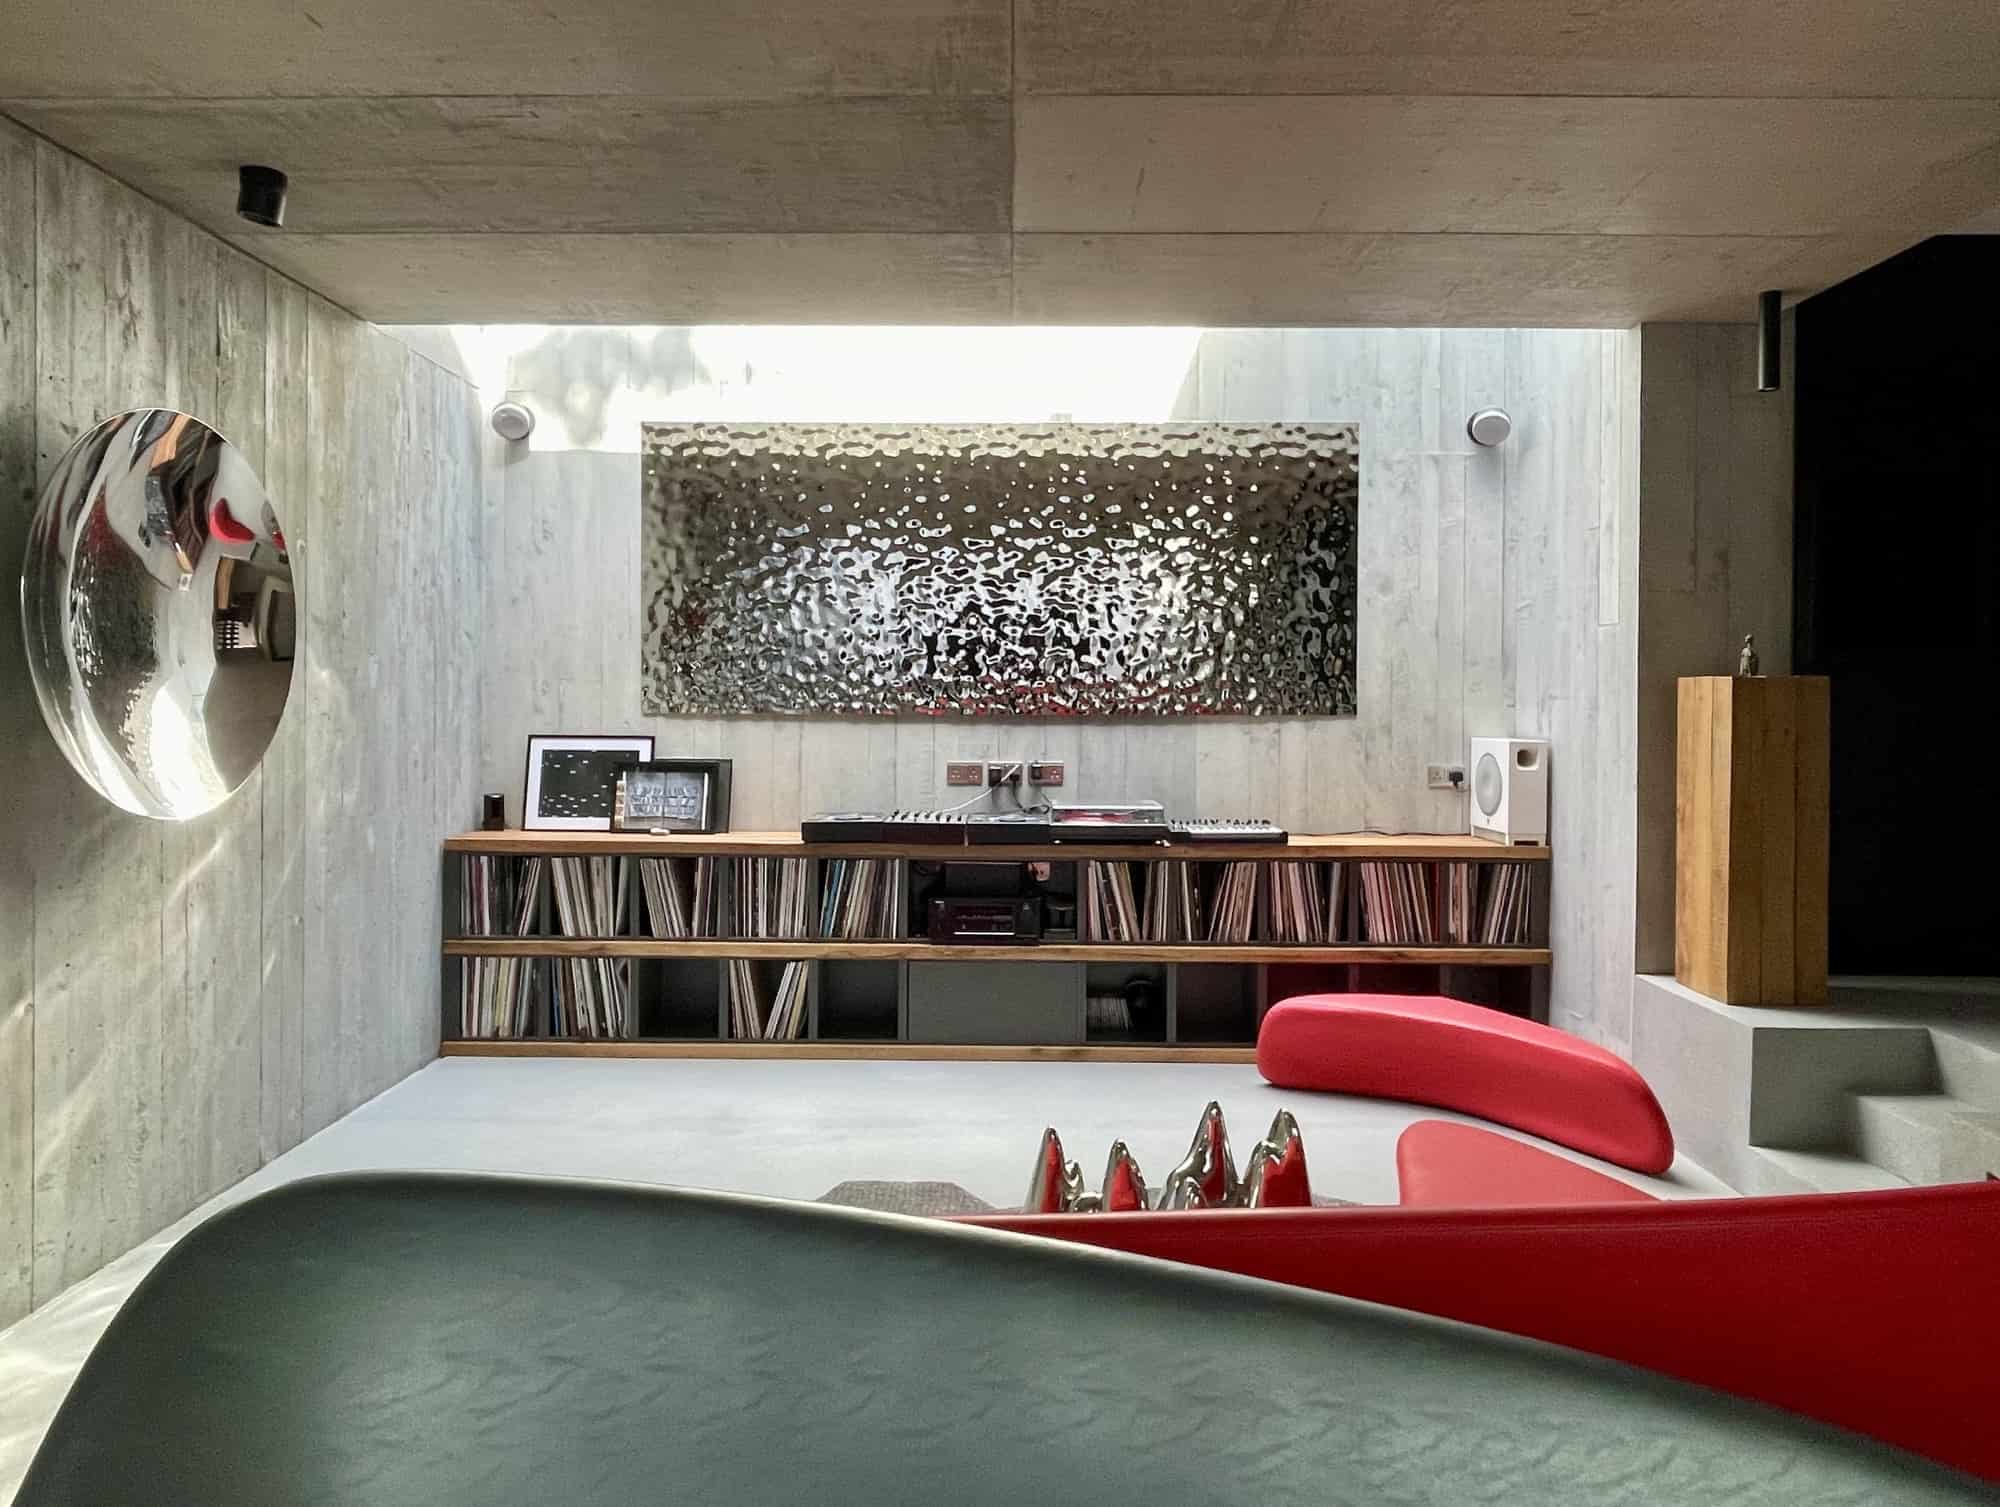 Bunker E12 - An incredible concrete-clad living space with contemporary and futuristic style furnishings and art - The Location Guys